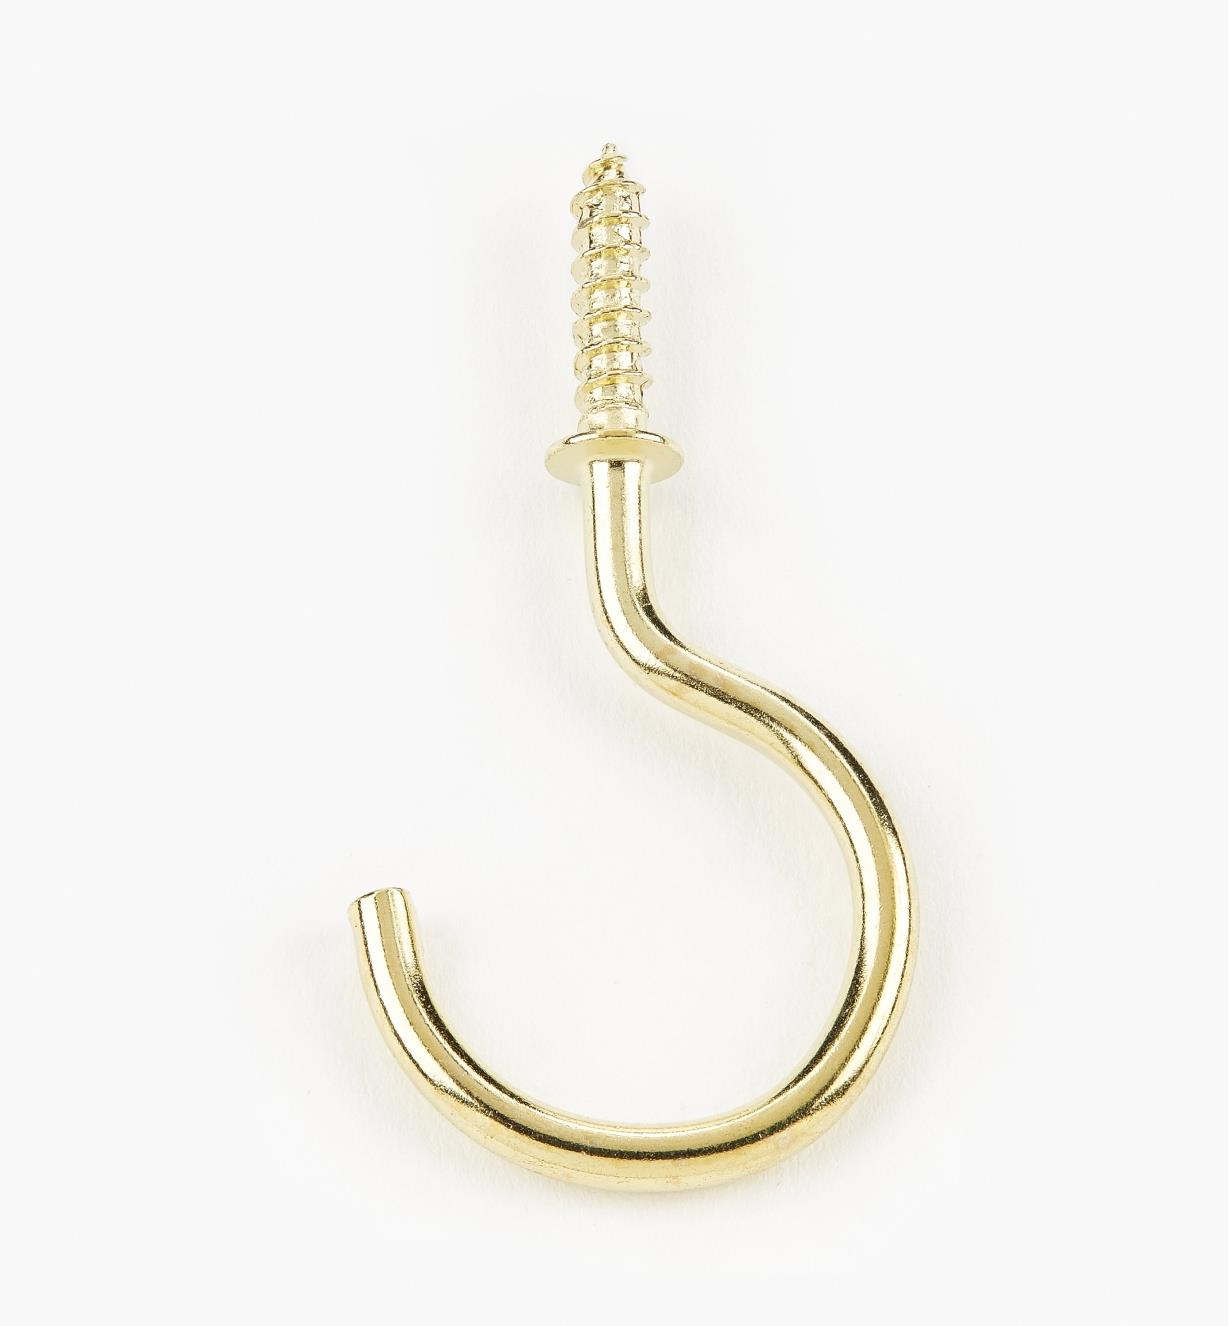 00S5625 - 1 1/2" Brass-Plated Cup Hooks (50)